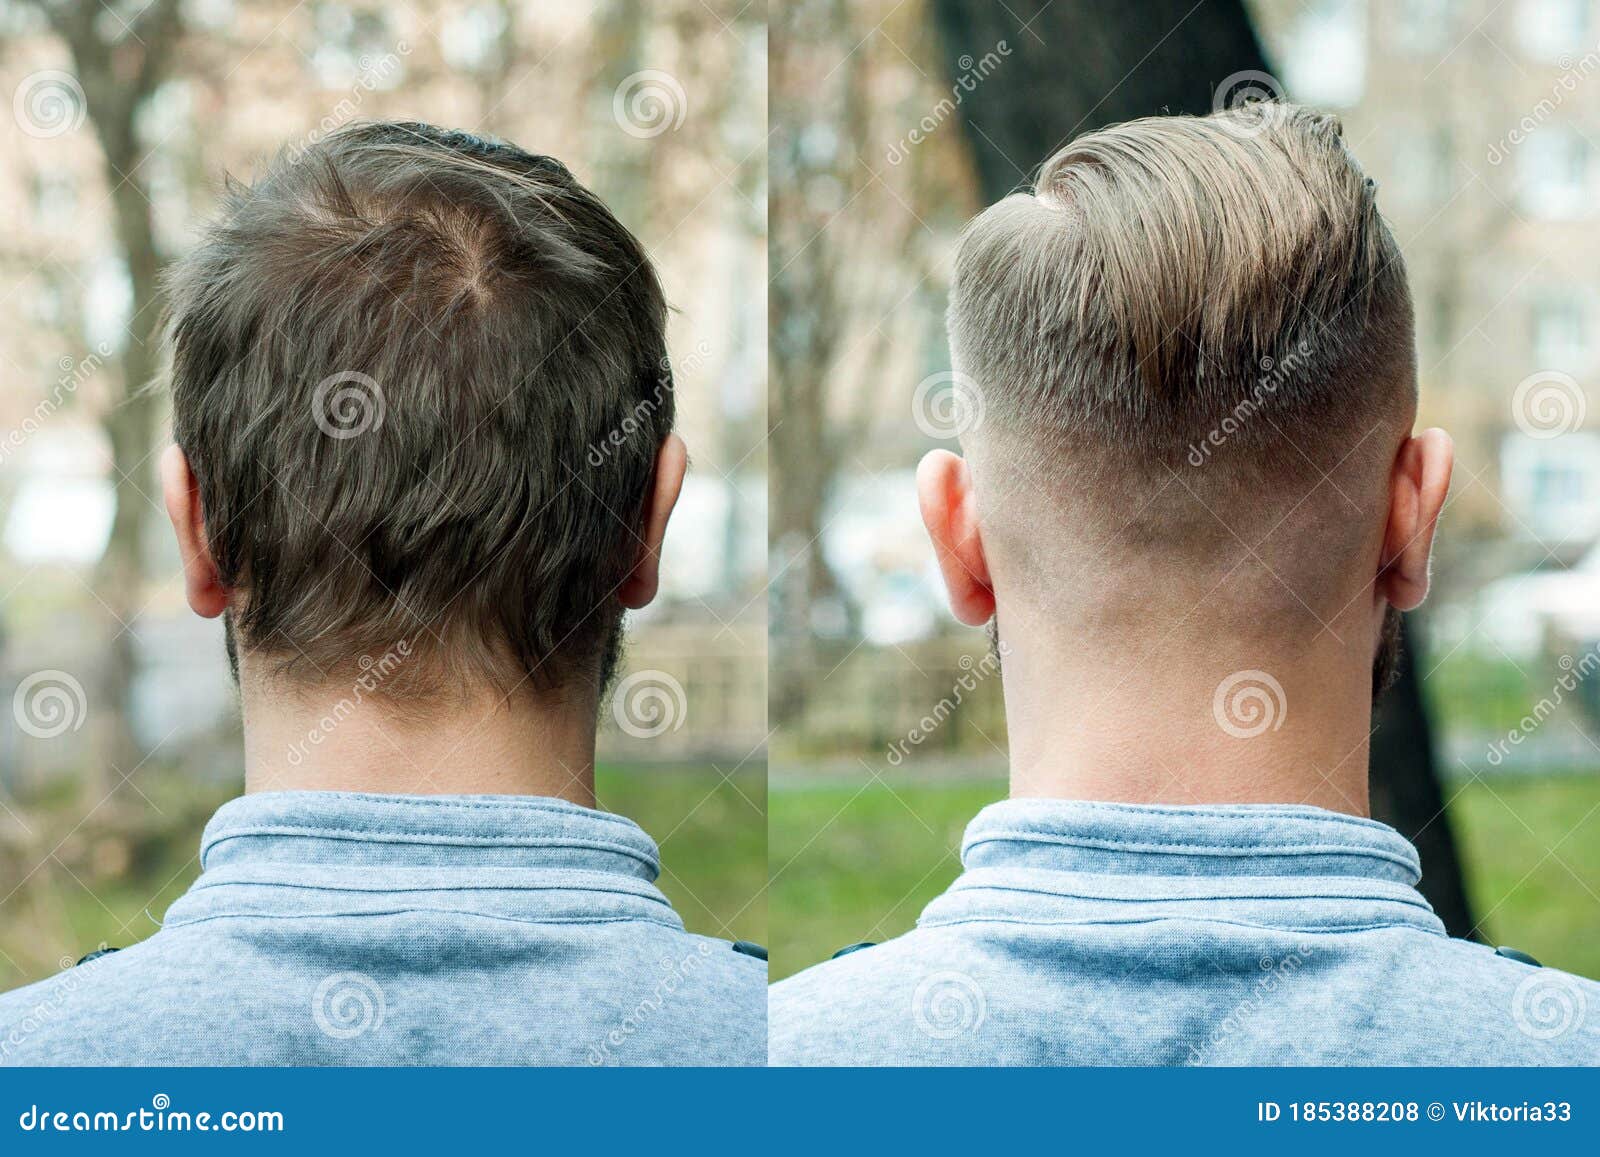 Bald Guy before after Haircut Concept for a Barber Shop: the Problem Man of  Hair Loss, Alopecia, Transplantation, Back Stock Photo - Image of male,  shaggy: 185388208